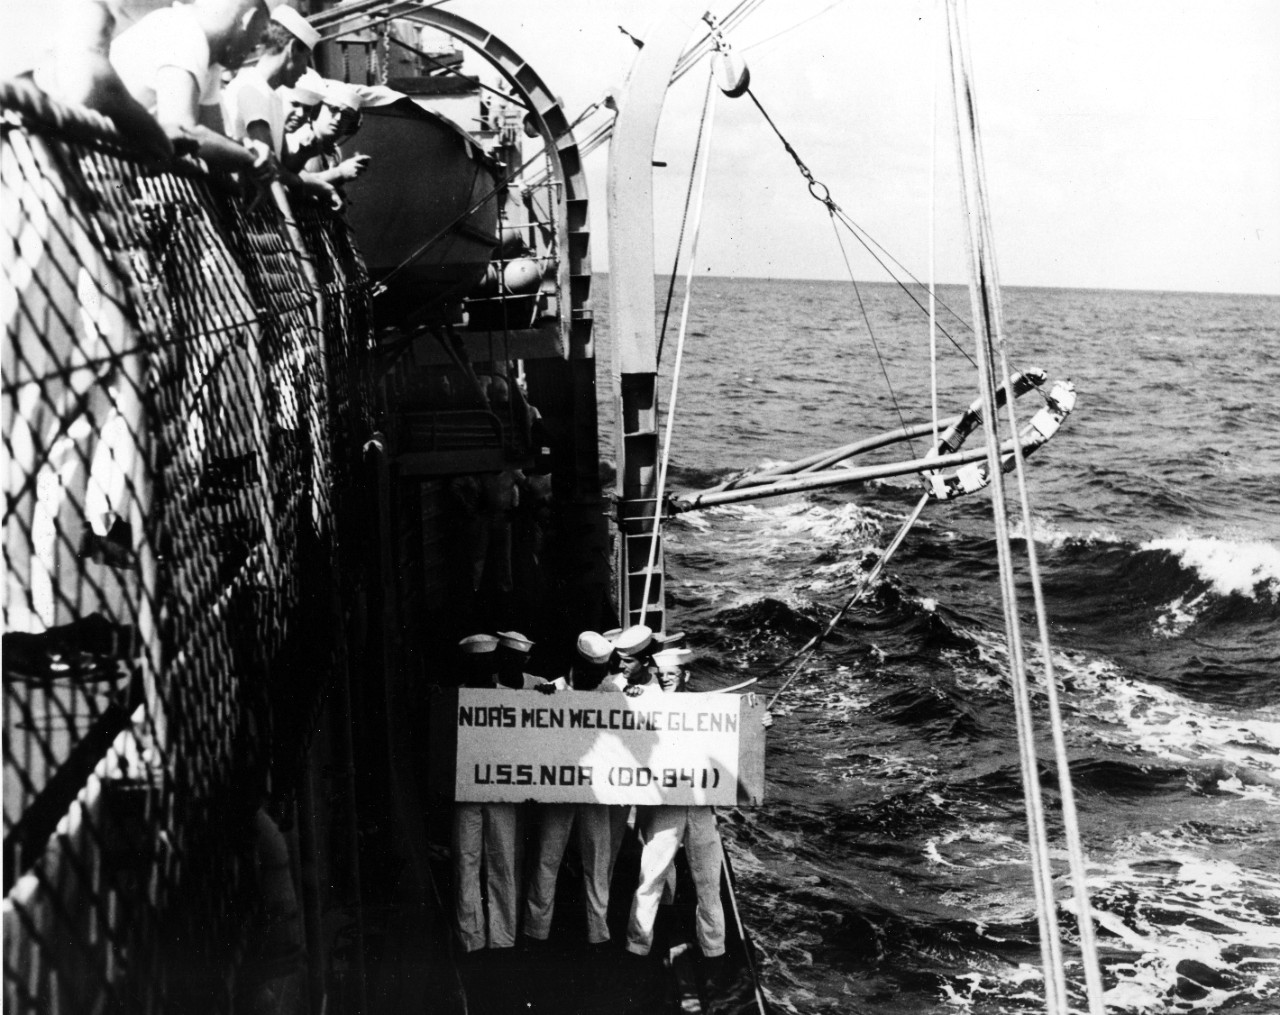 Cape Canaveral, FL - naval personnel of USS Noa (DD-481) line ship's rail holding welcoming sign to astronaut John H. Glenn, as they participate in recovery of spacecraft after world orbital flight. February 20, 1962. 